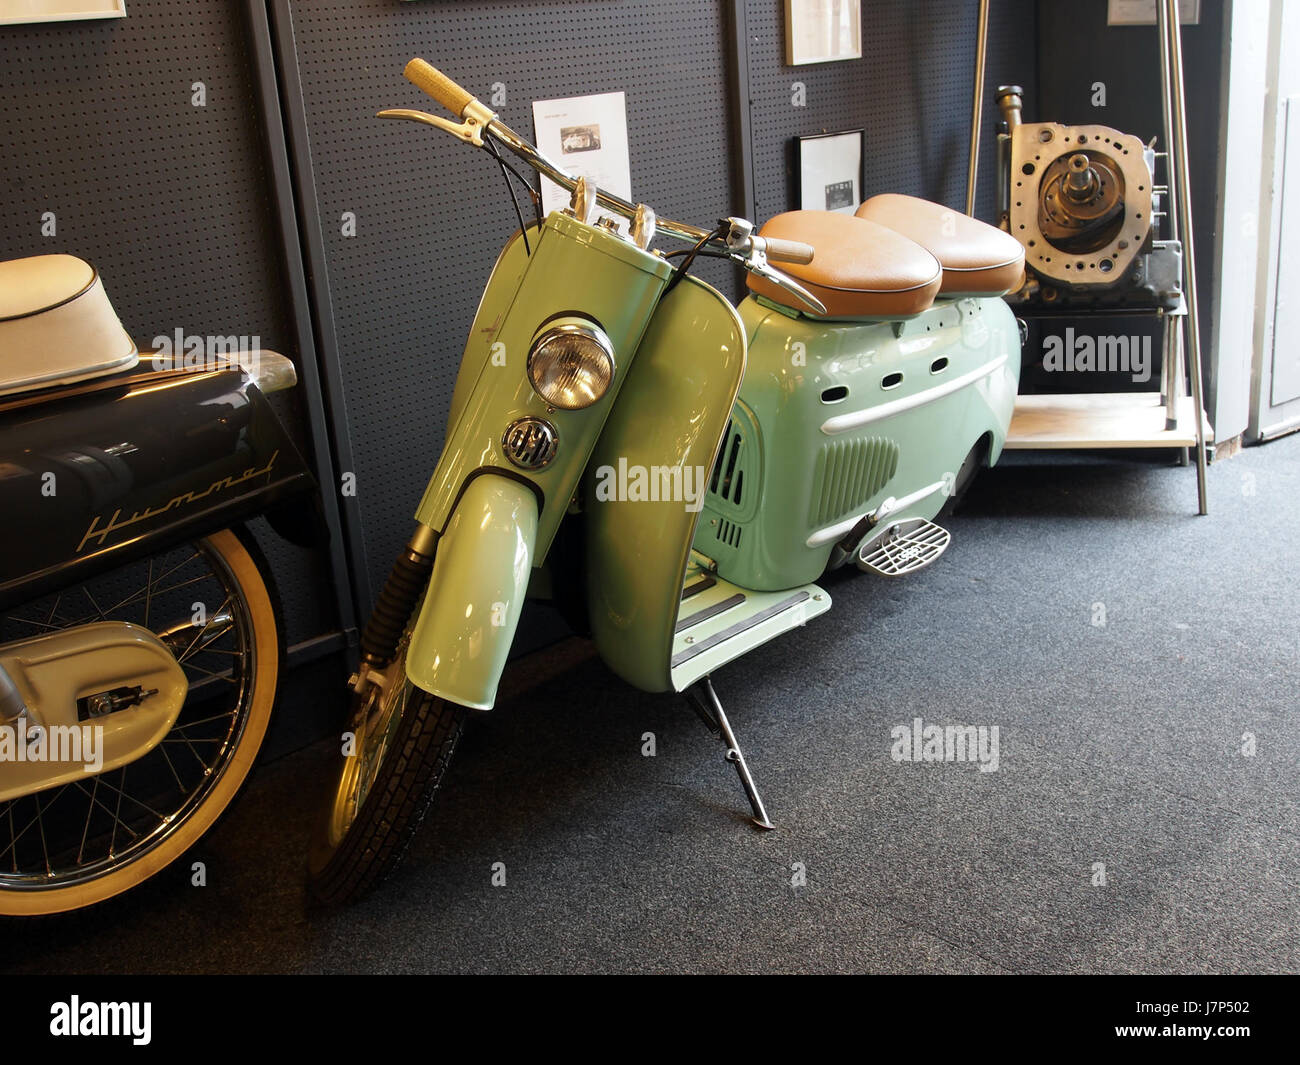 1957 DKW Hobby pic1 Banque D'Images